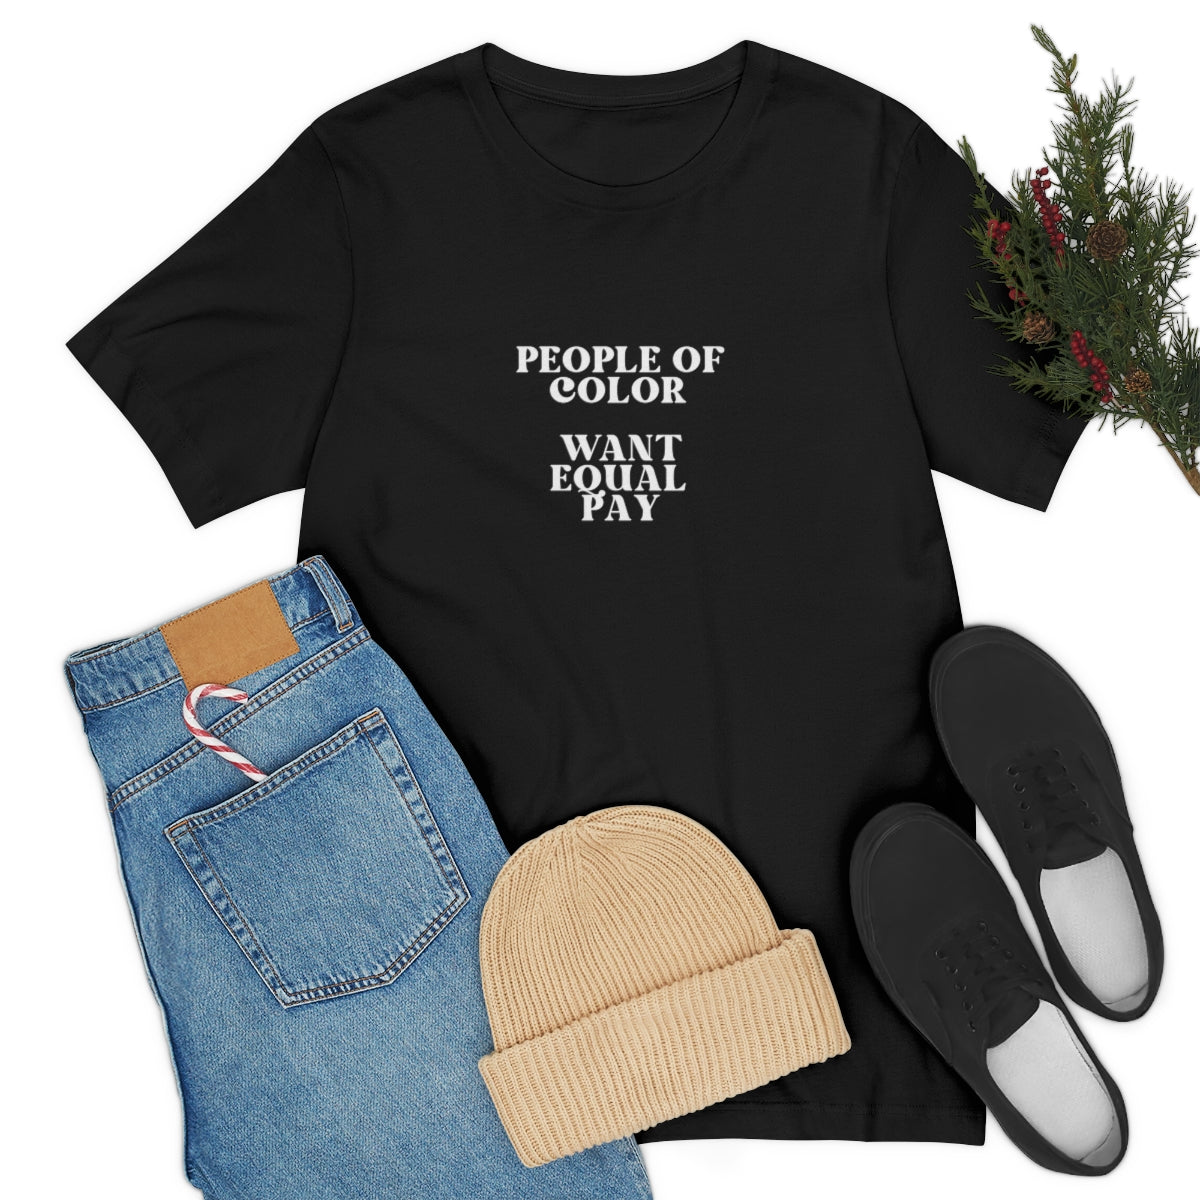 Equal Pay T Shirt, People of Color Want Equal Pay Statement Tees, Equality Tees, Equality, Diversity, Equity, Inclusion Tops